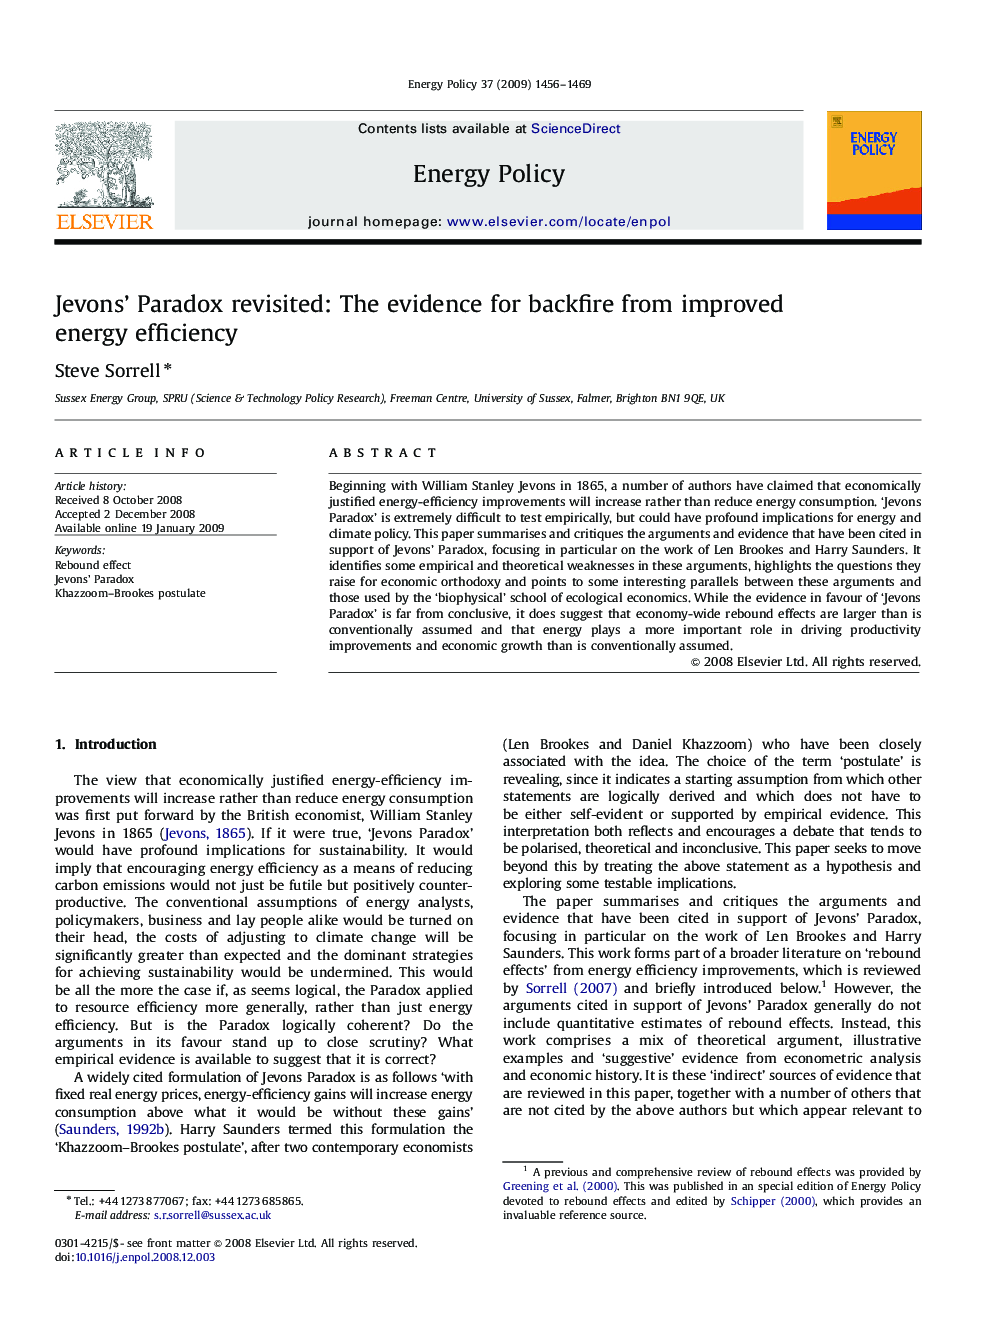 Jevons’ Paradox revisited: The evidence for backfire from improved energy efficiency